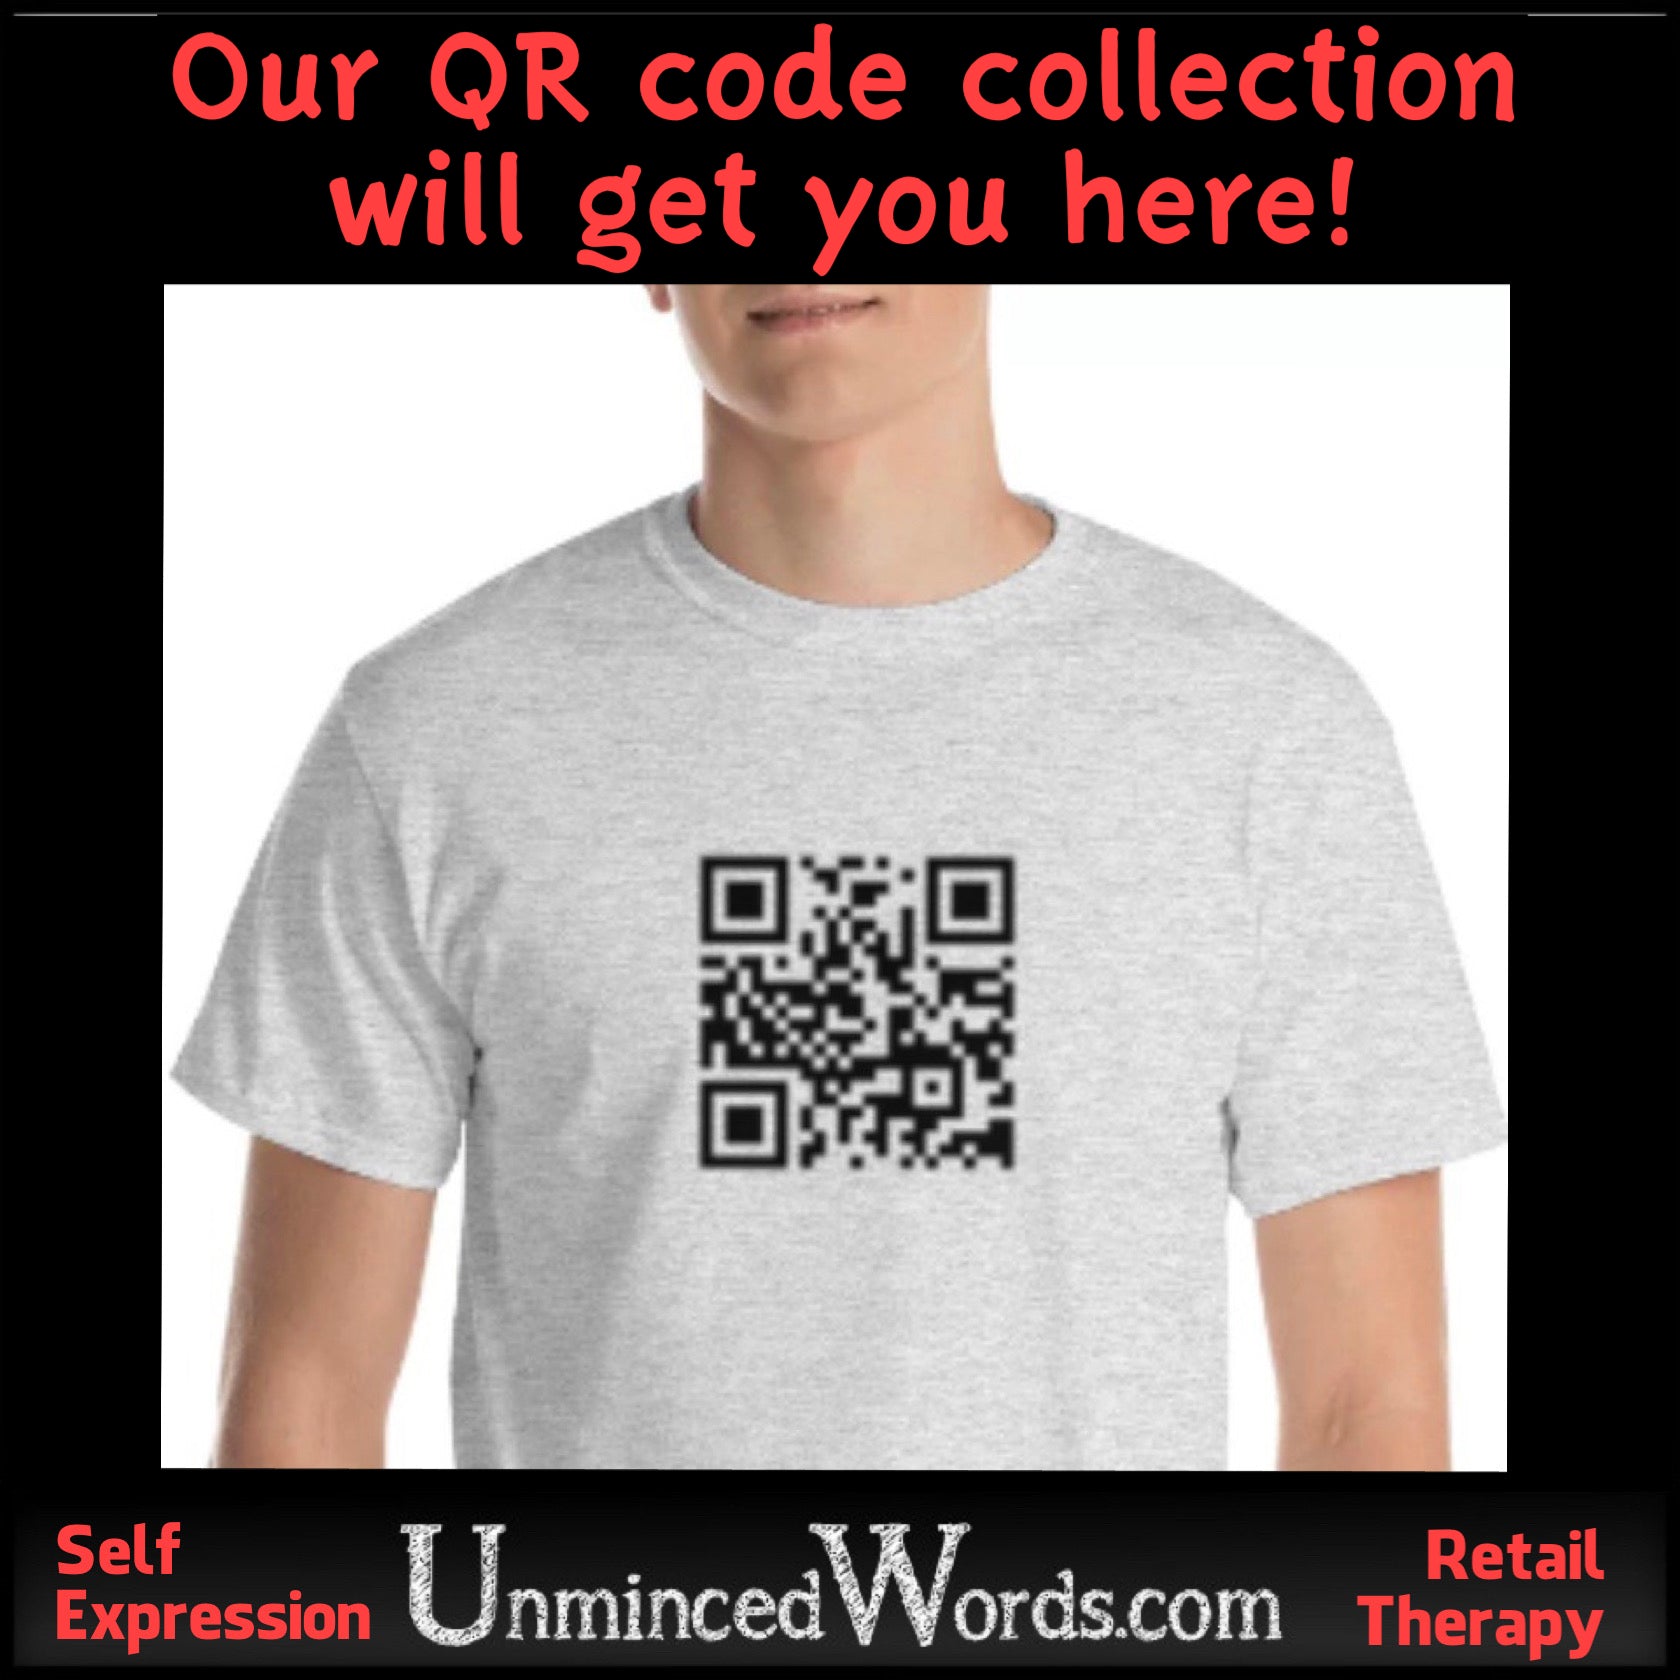 Our QR code collection will get you here.